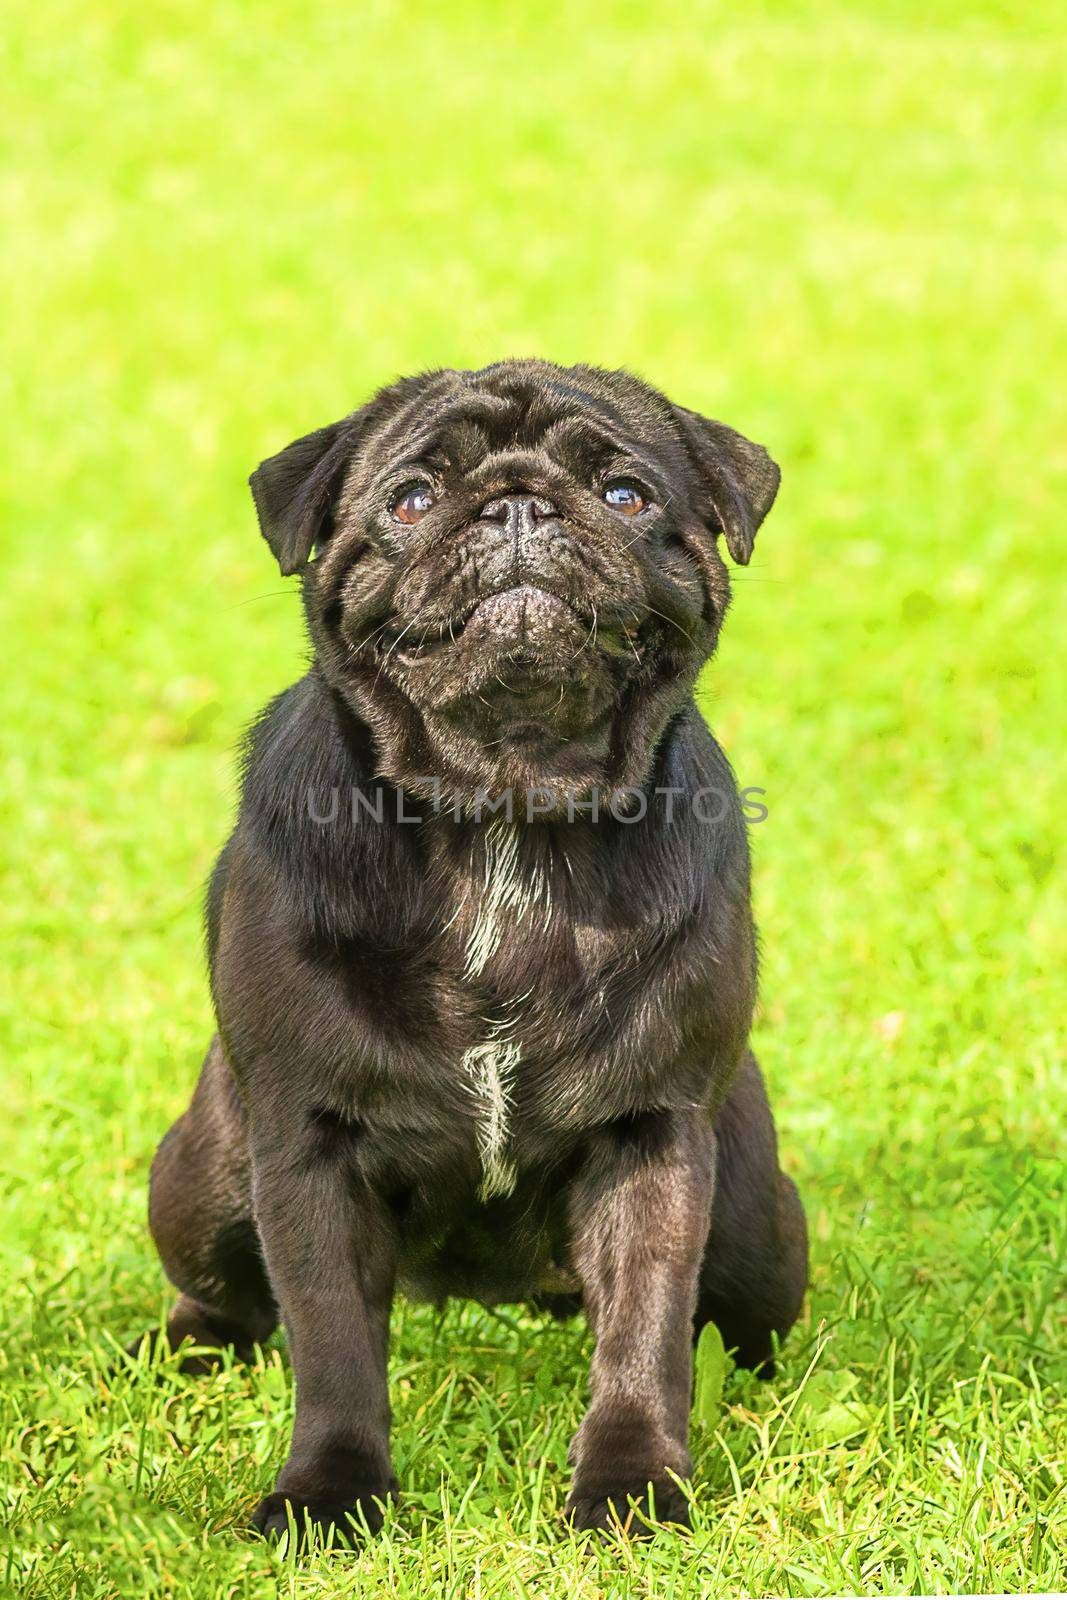 Pug dog. Sits in front of the camera and looks up against a background of green blurry grass. Space under the text. 2018 year of the dog in the eastern calendar